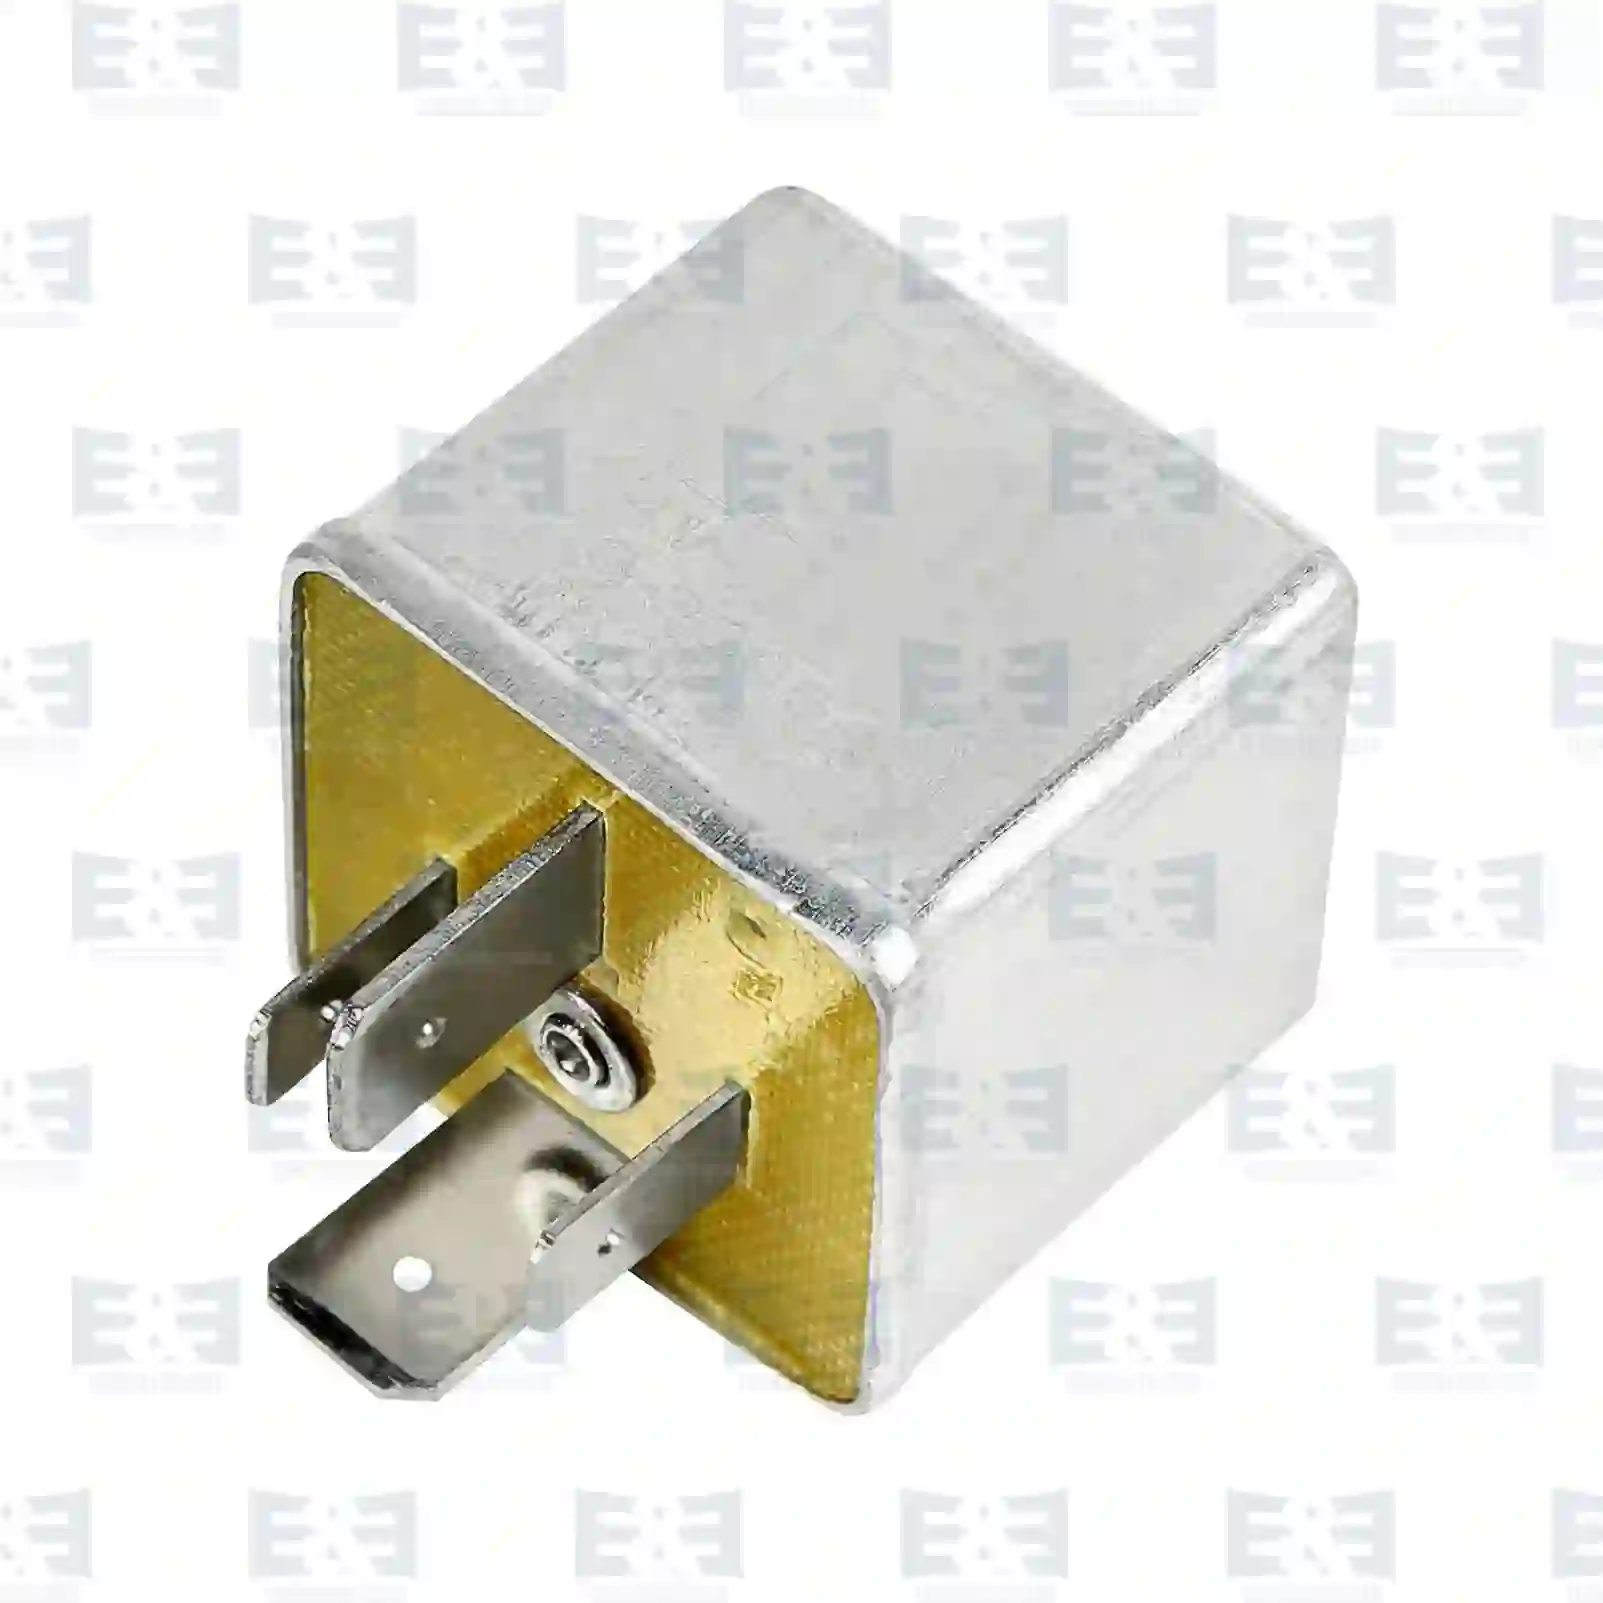 Relay, flame starter system, 2E2290501, 81259020415, N1011025716 ||  2E2290501 E&E Truck Spare Parts | Truck Spare Parts, Auotomotive Spare Parts Relay, flame starter system, 2E2290501, 81259020415, N1011025716 ||  2E2290501 E&E Truck Spare Parts | Truck Spare Parts, Auotomotive Spare Parts